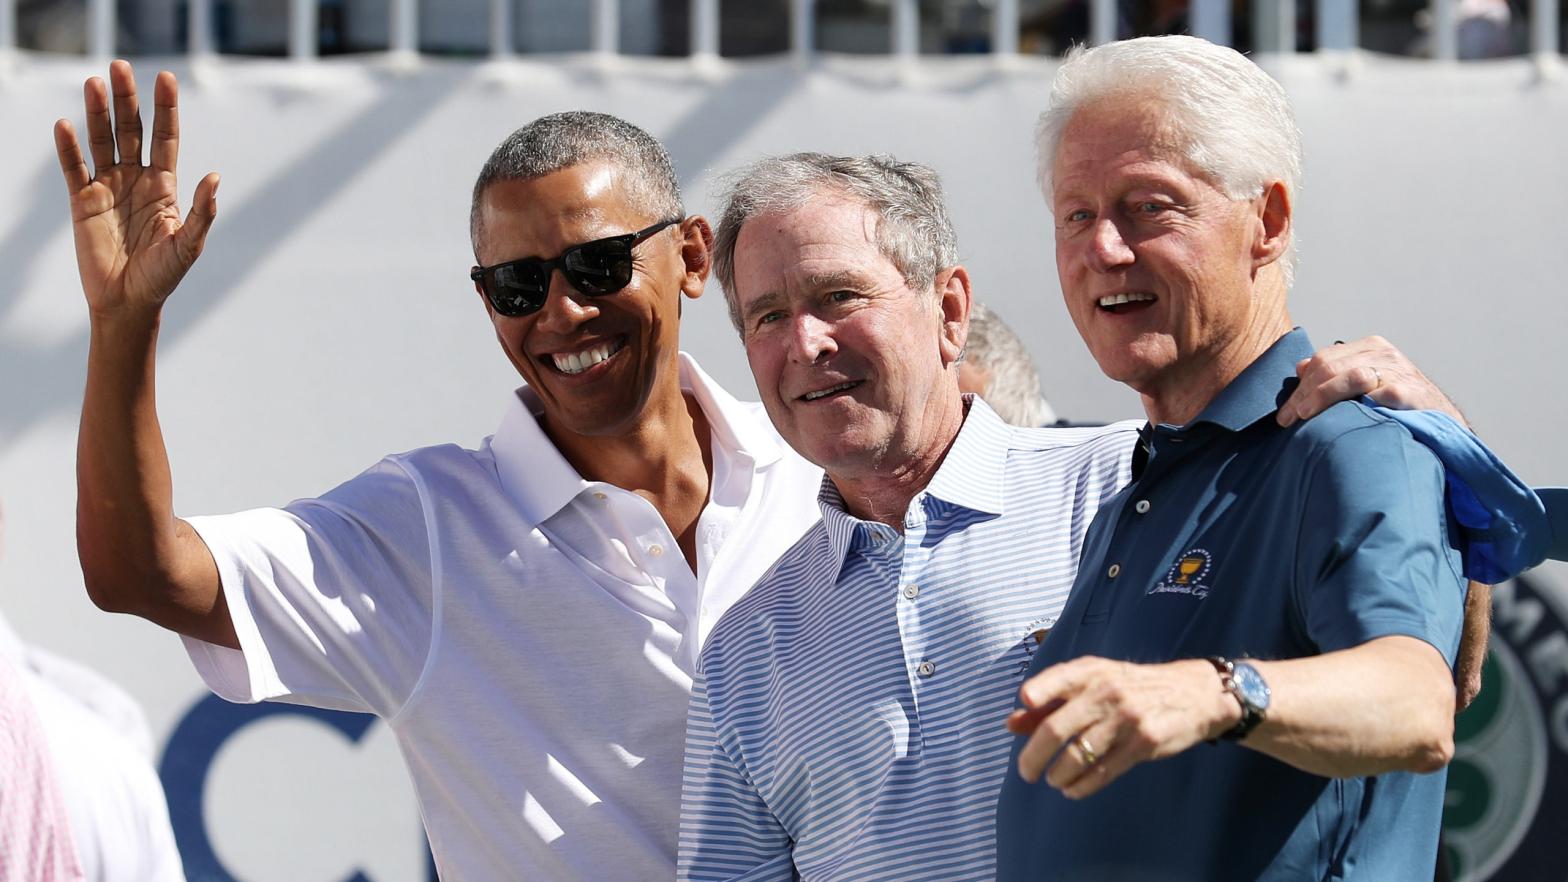 Barack Obama, George W. Bush, and Bill Clinton attending the trophy presentation at the 2017 Presidents Cup held at the Liberty National Golf Club. (Photo: Rob Carr)